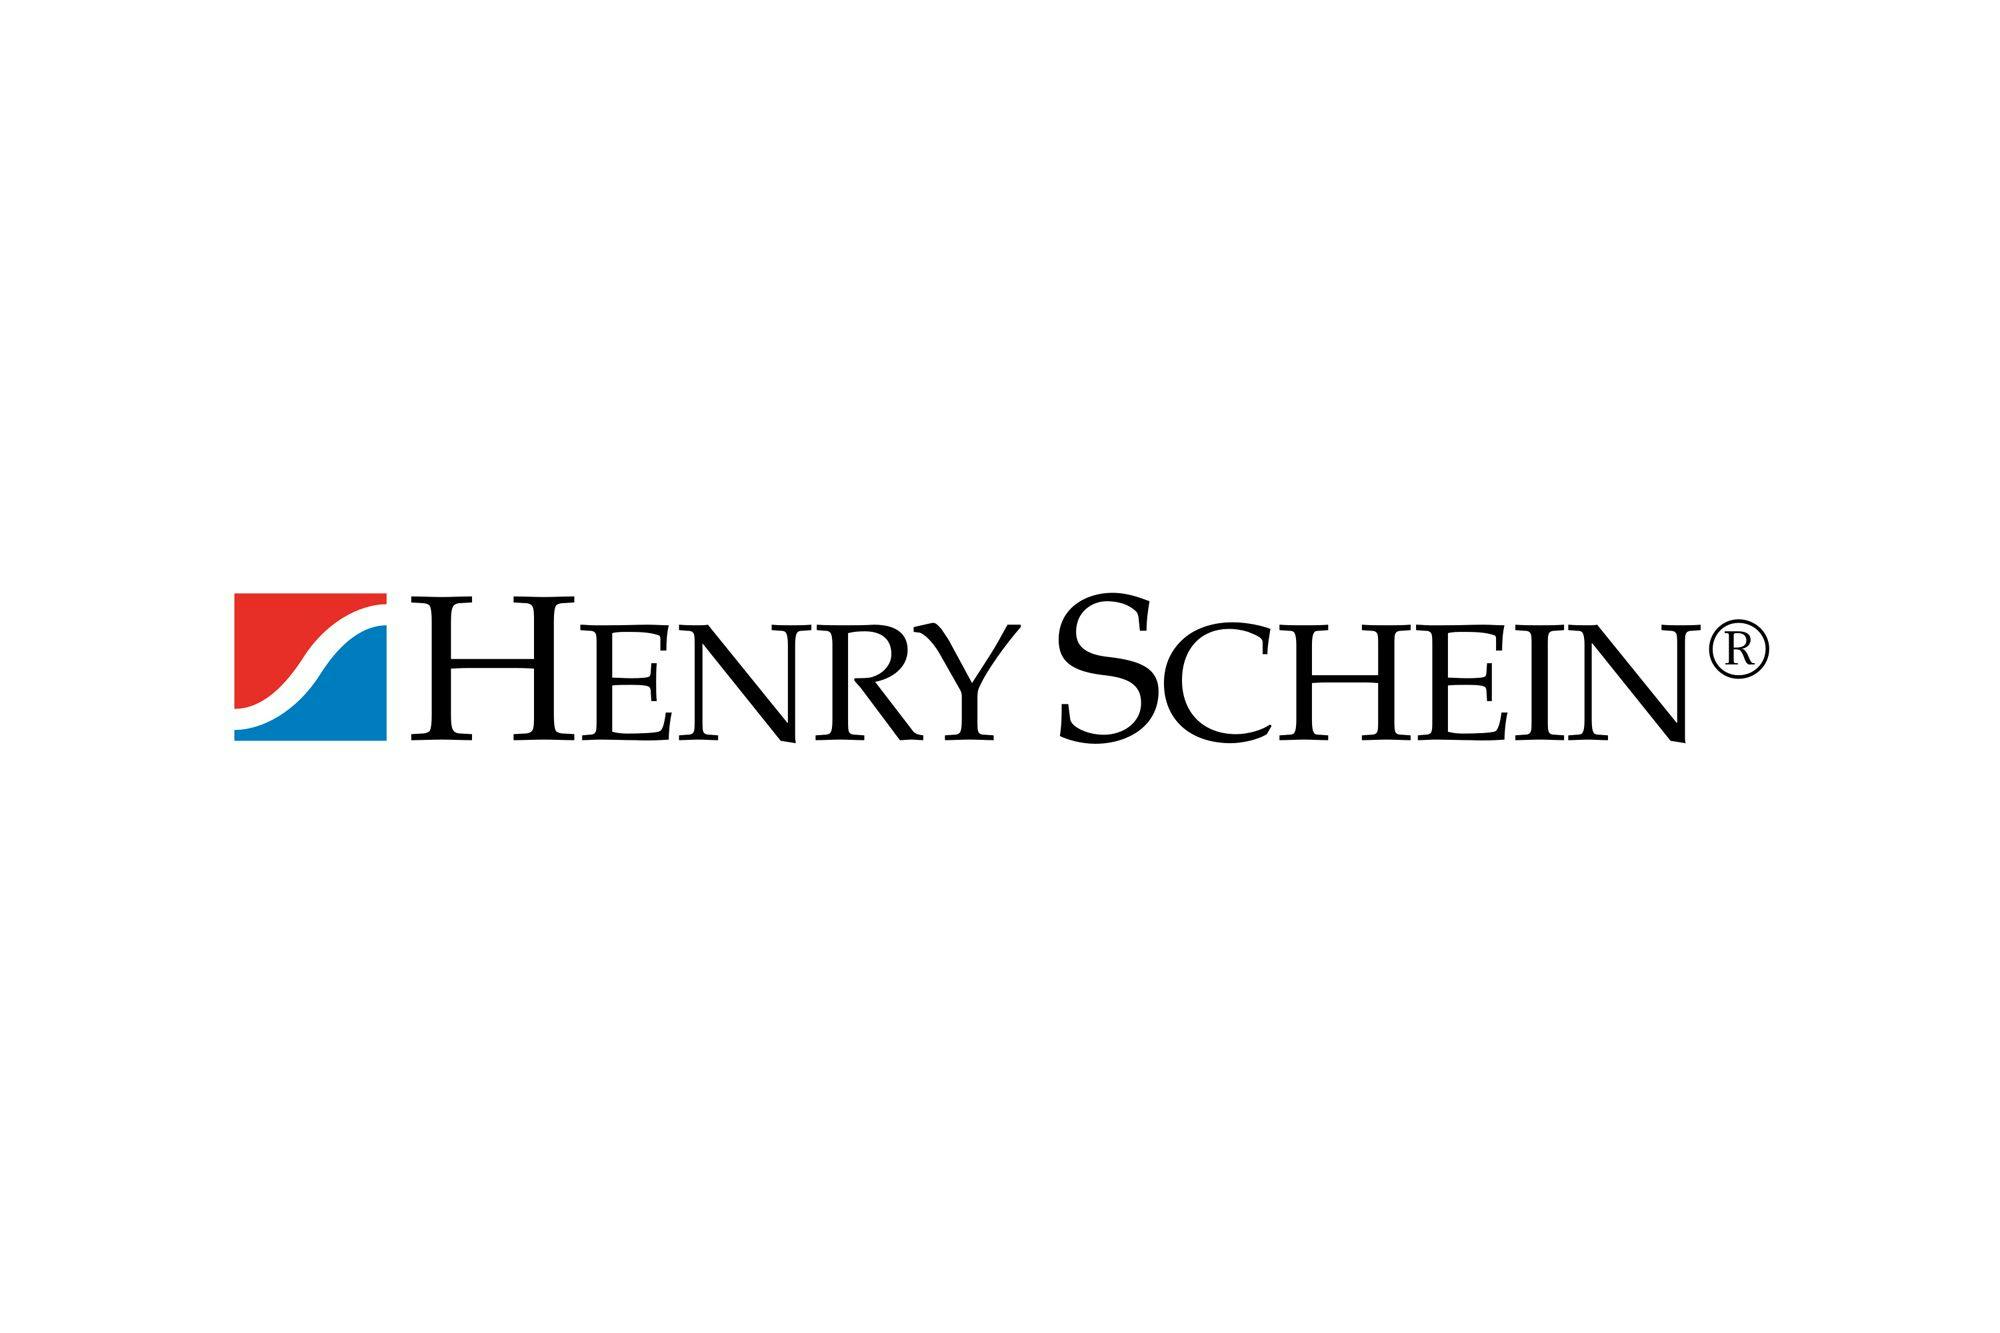 Henry Schein Acquires S.I.N. Implant System